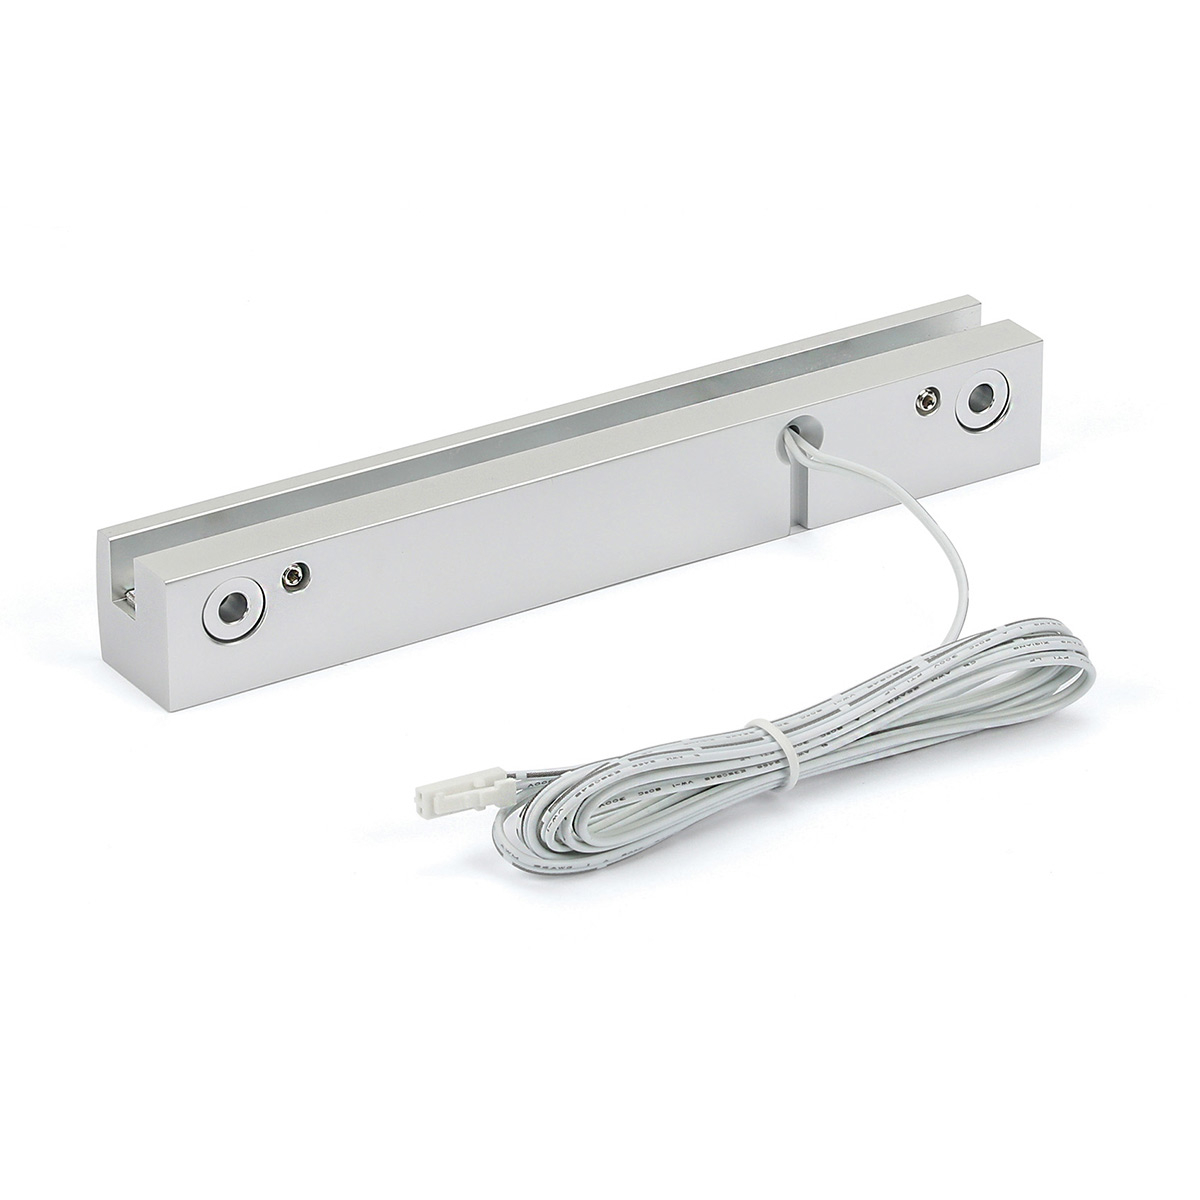 RED LED Sign Clamp in 4 3/4'' (120 mm) length X 1'' (25.4 mm) Silver satin aluminum finish.Mount Kit Supports Signs Up To 5/16'' Thick, Wall Mount, Low Voltage transformer included.